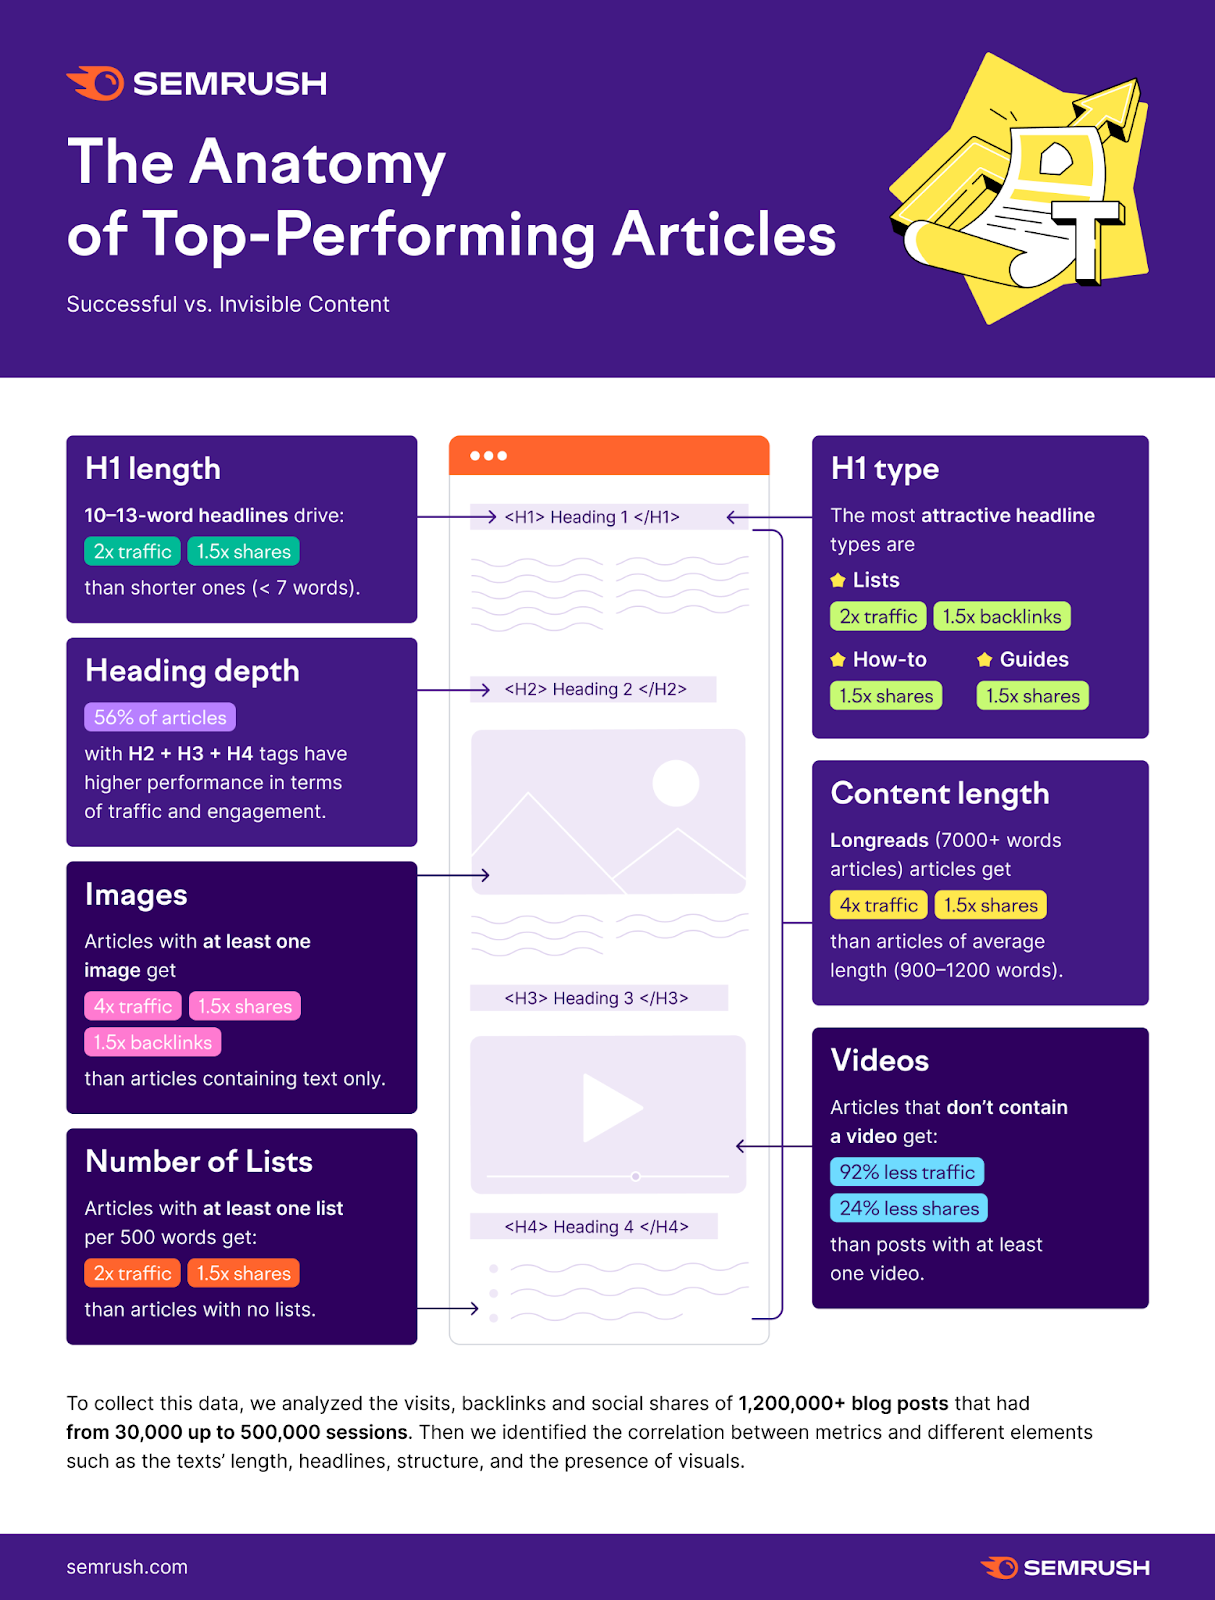 an infographic by Semrush titled "The Anatomy of Top-Performing Articles"